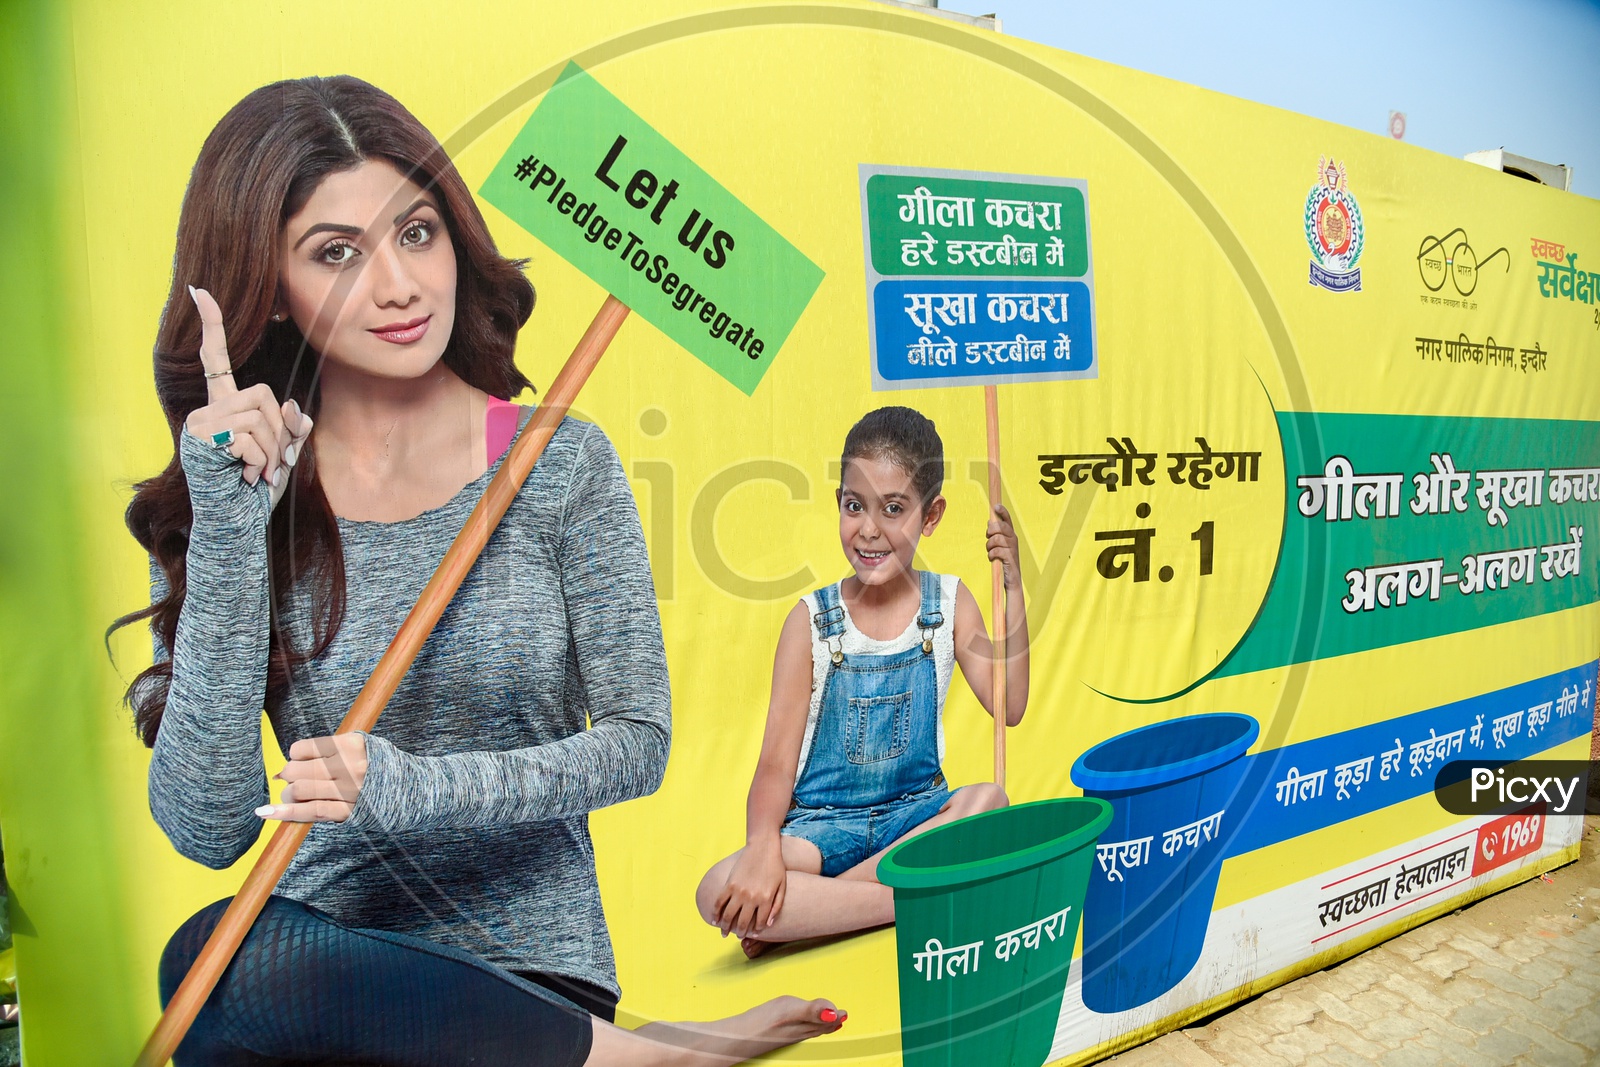 Swach Bharat eduction banner in Indore